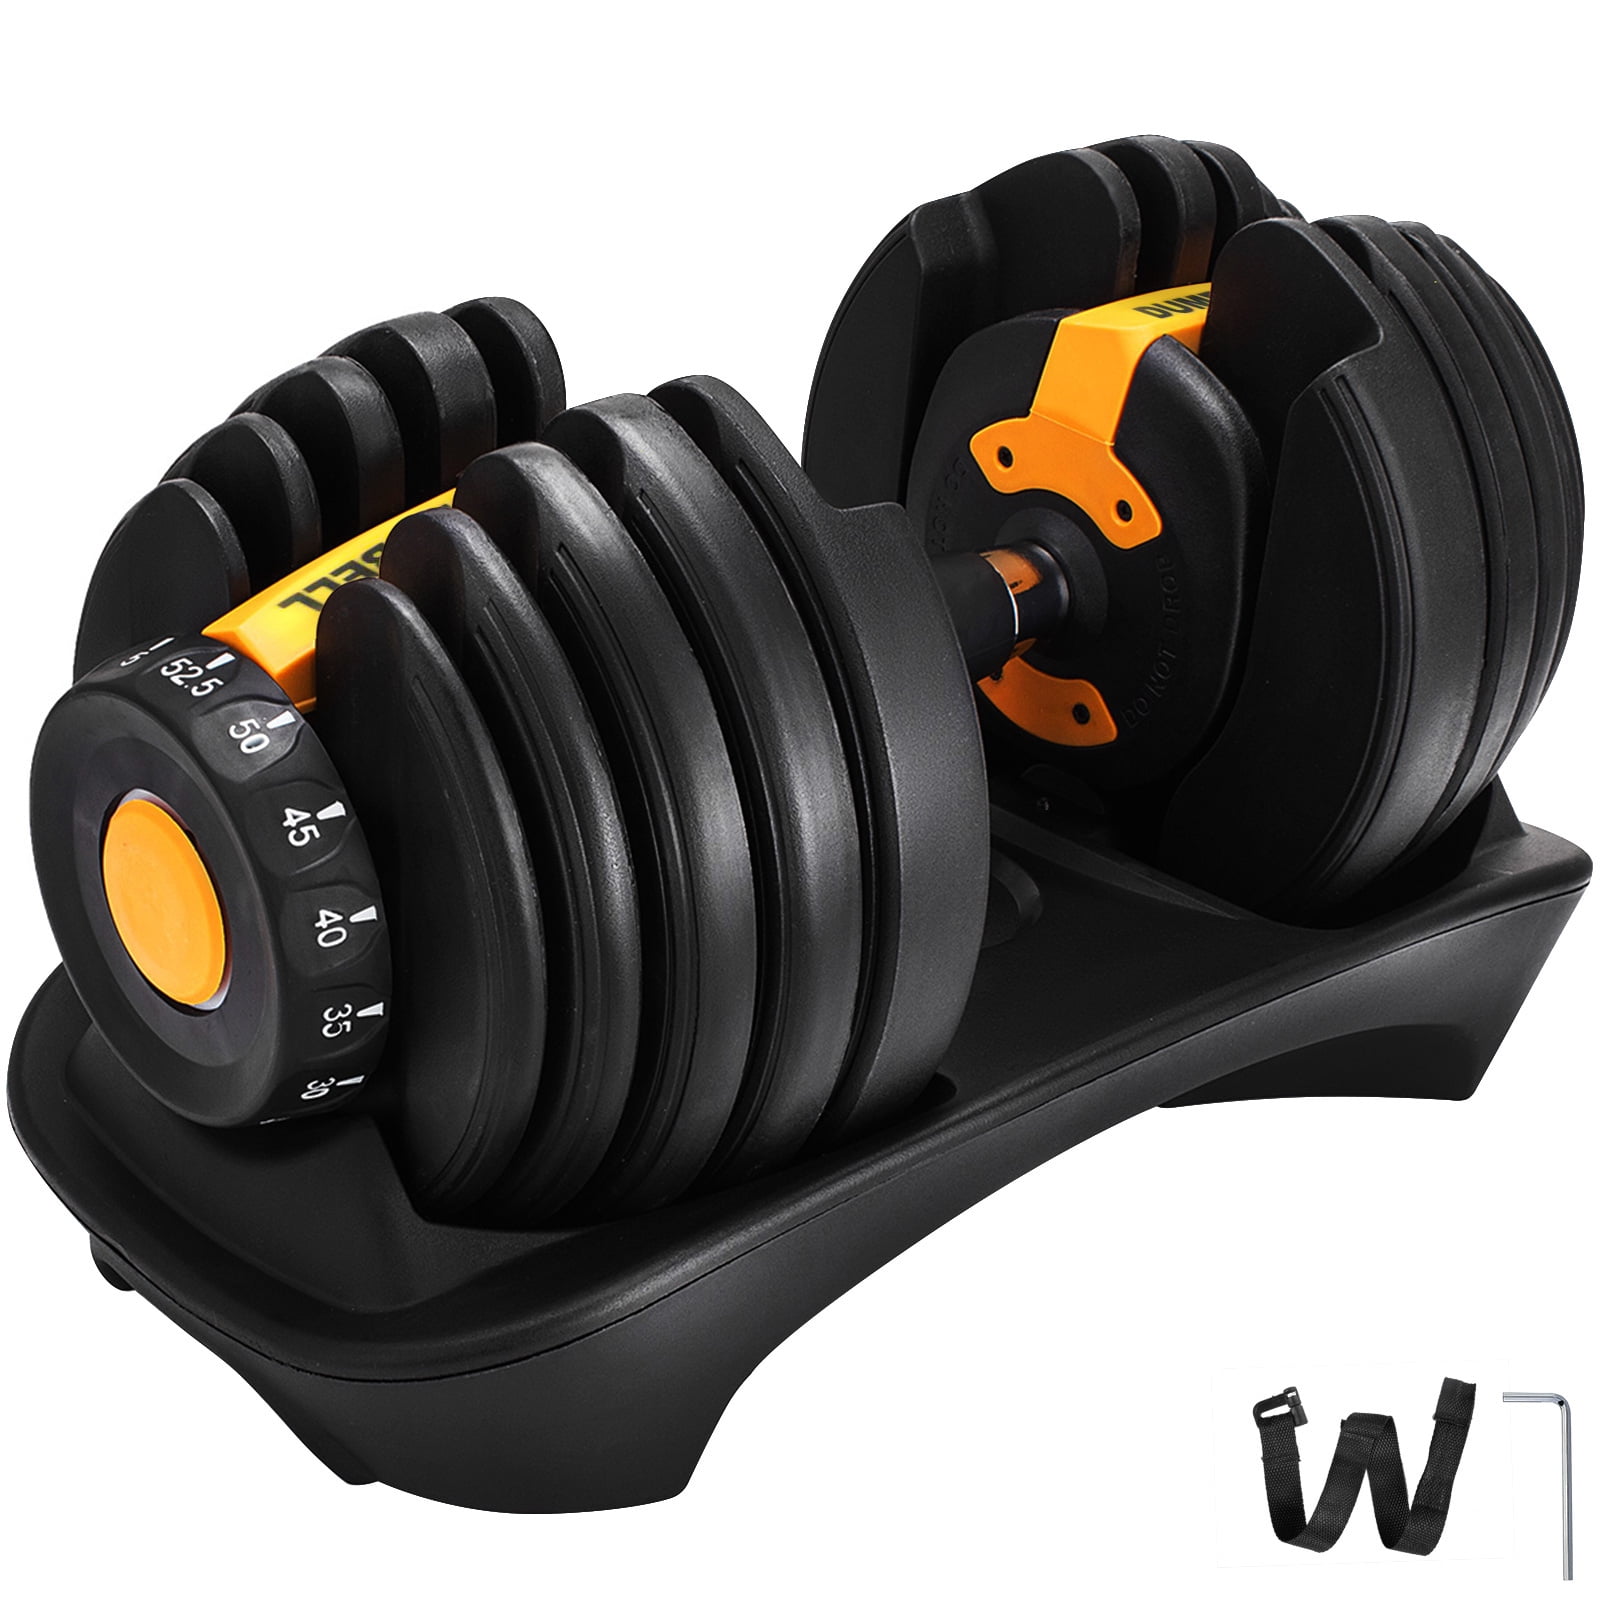 Details about   Adjustable Dumbbell Weight Select Up To 44LB Fitness Workout Gym Dumbbells Syncs 